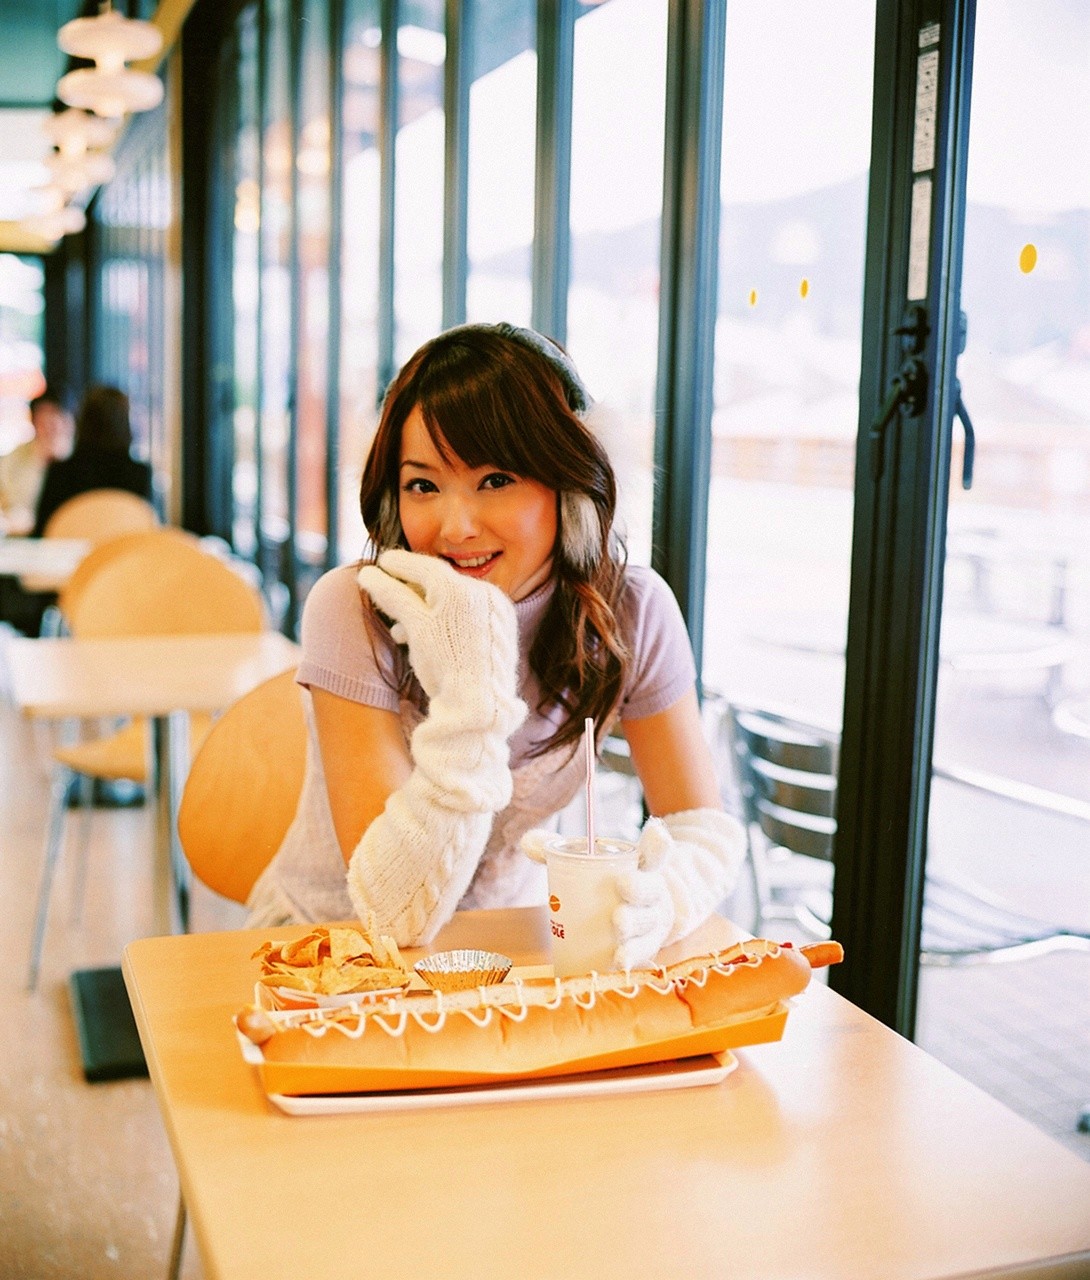 People 1090x1280 Nozomi Sasaki Asian Visual Young Jum cafeteria  hot dogs brunette Japanese women Japanese model smiling looking at viewer women indoors women